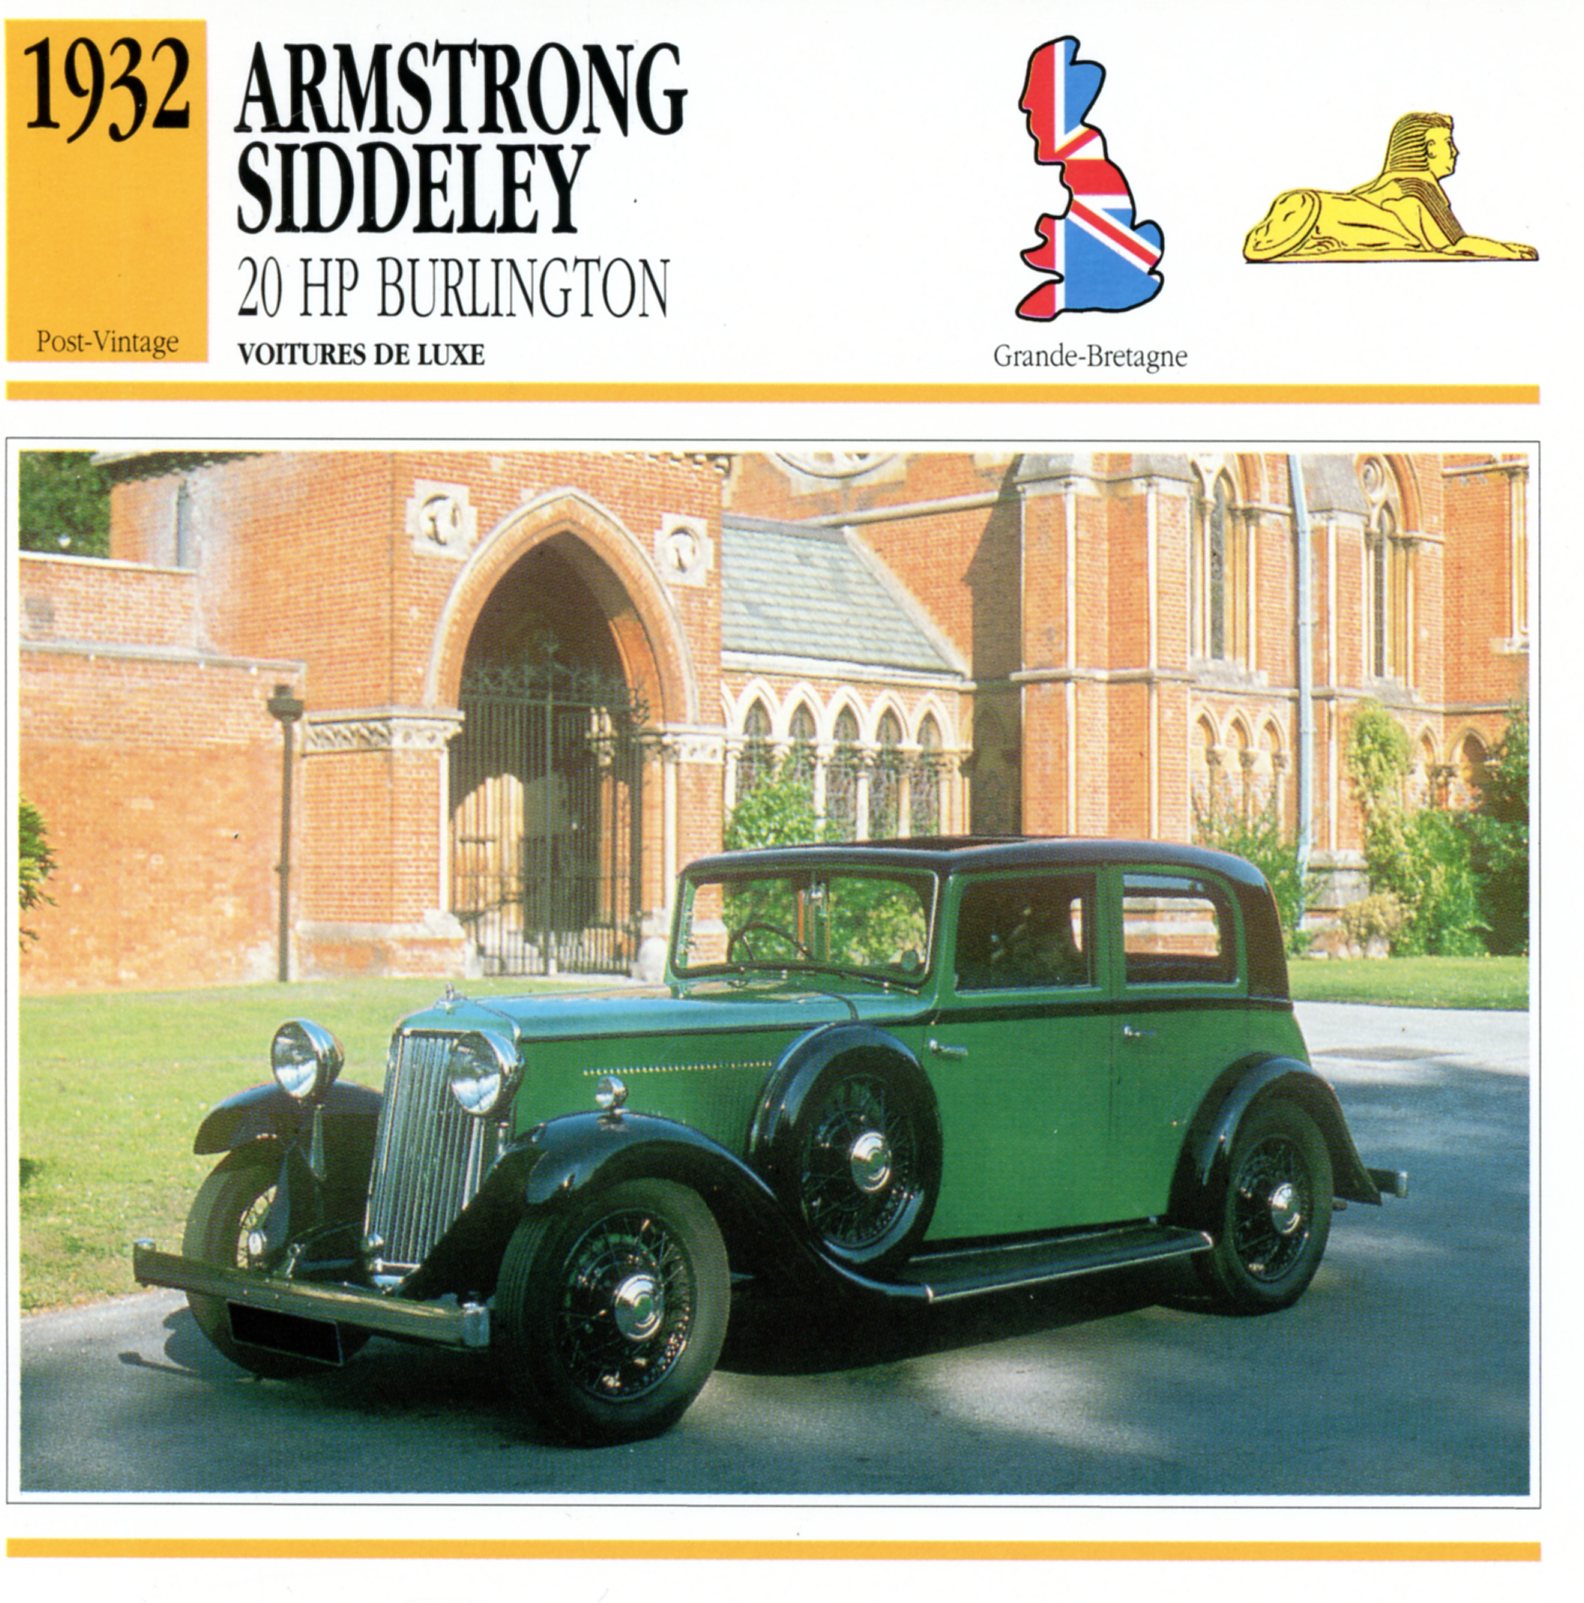 FICHE-AUTO-ARMSTRONG-SIDDELEY-20HP-LEMASTERBROCKERS-CARS-CARD